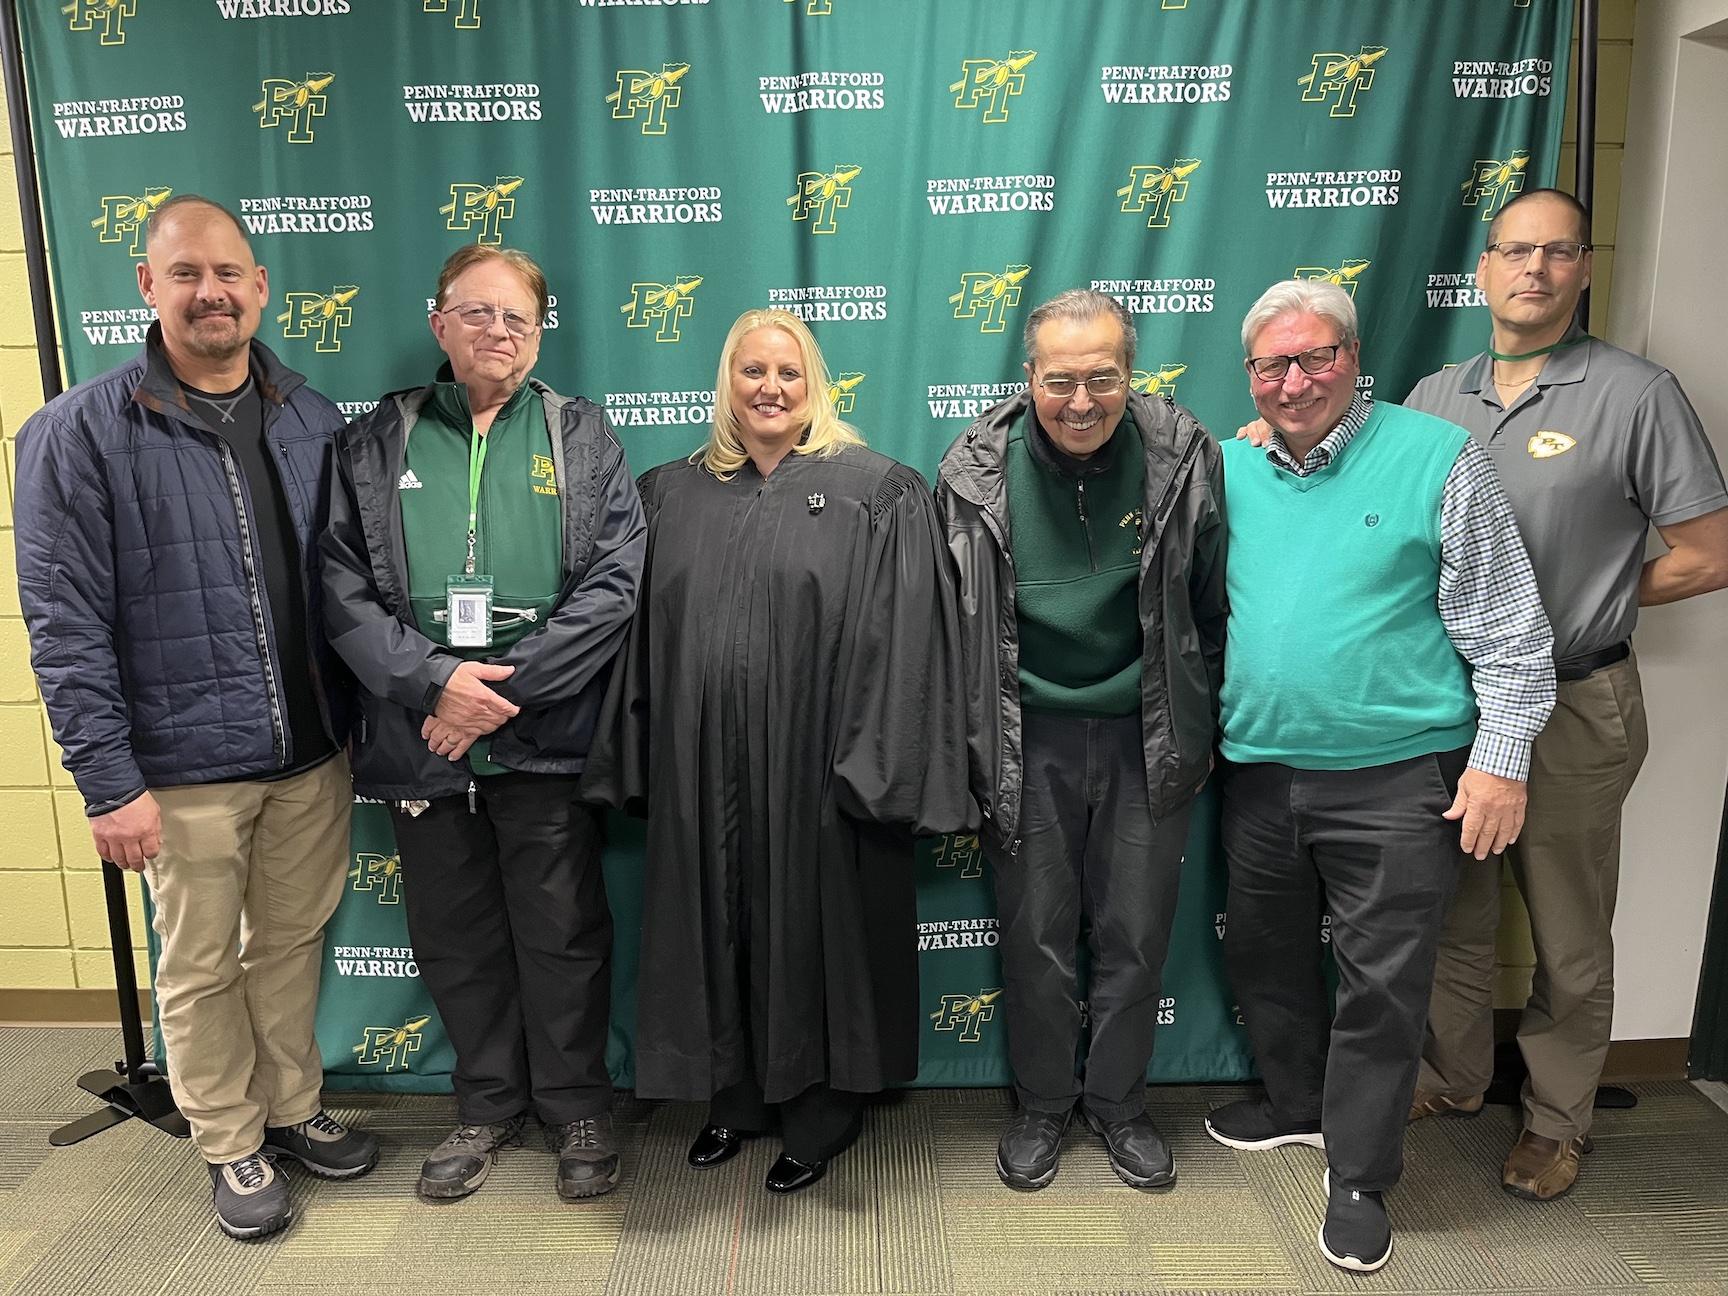 Judge Rebecca Tyburski attended the December 4 board meeting to give the oath of office to re-elected school directors Dr. Koscho, Mr. Leonard, Mr. Petrucci, Mr. Matarazzo, and Mr. Kochasic